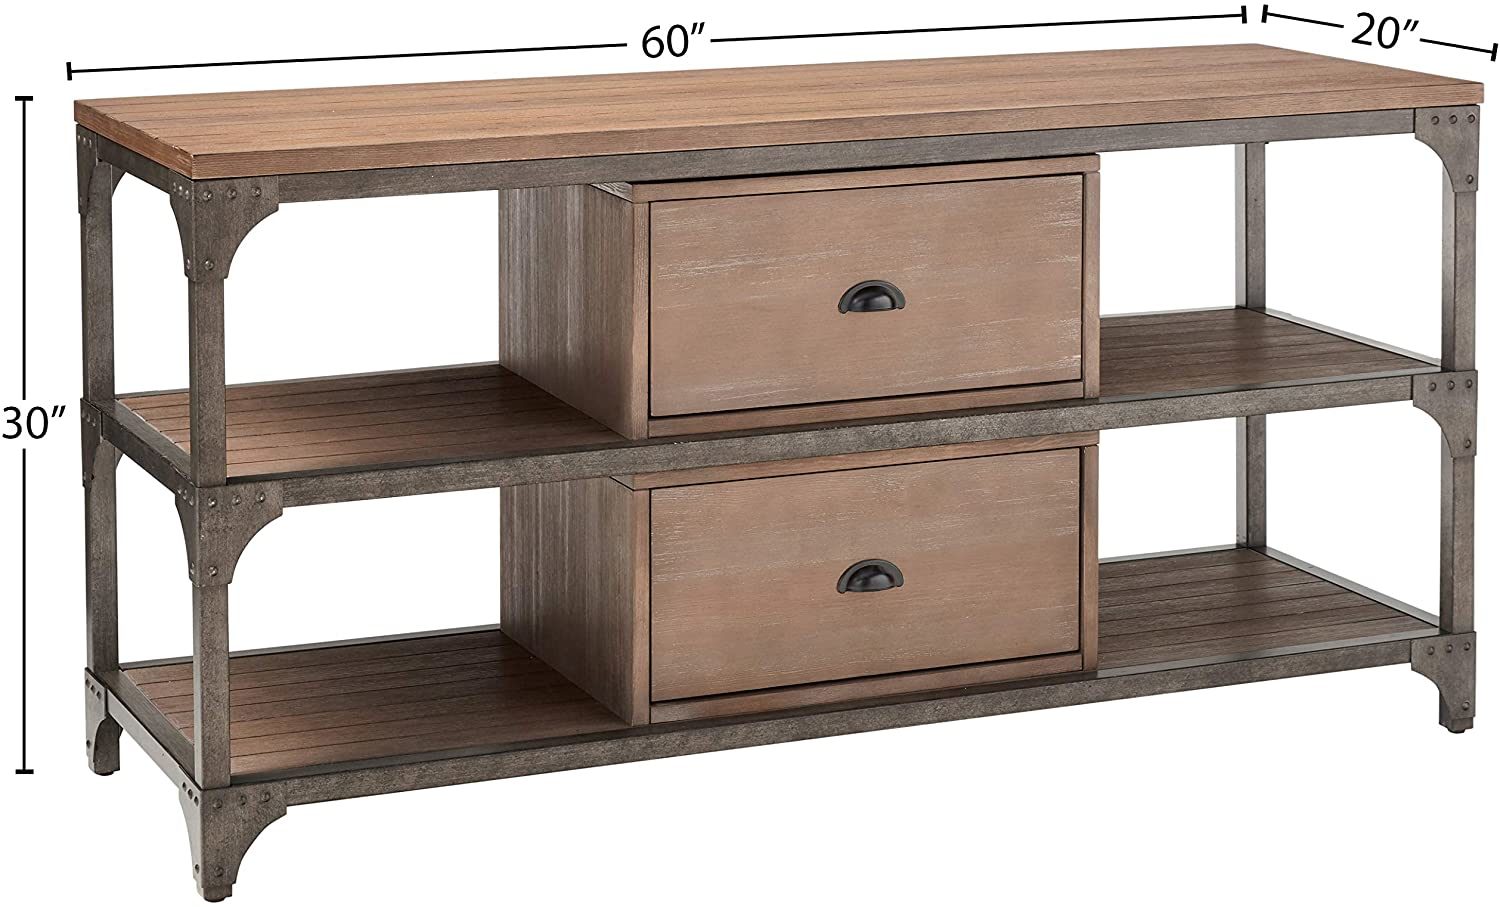 Gorden TV Stand in Weathered Oak & Antique Silver 91504 Home Decor by Design